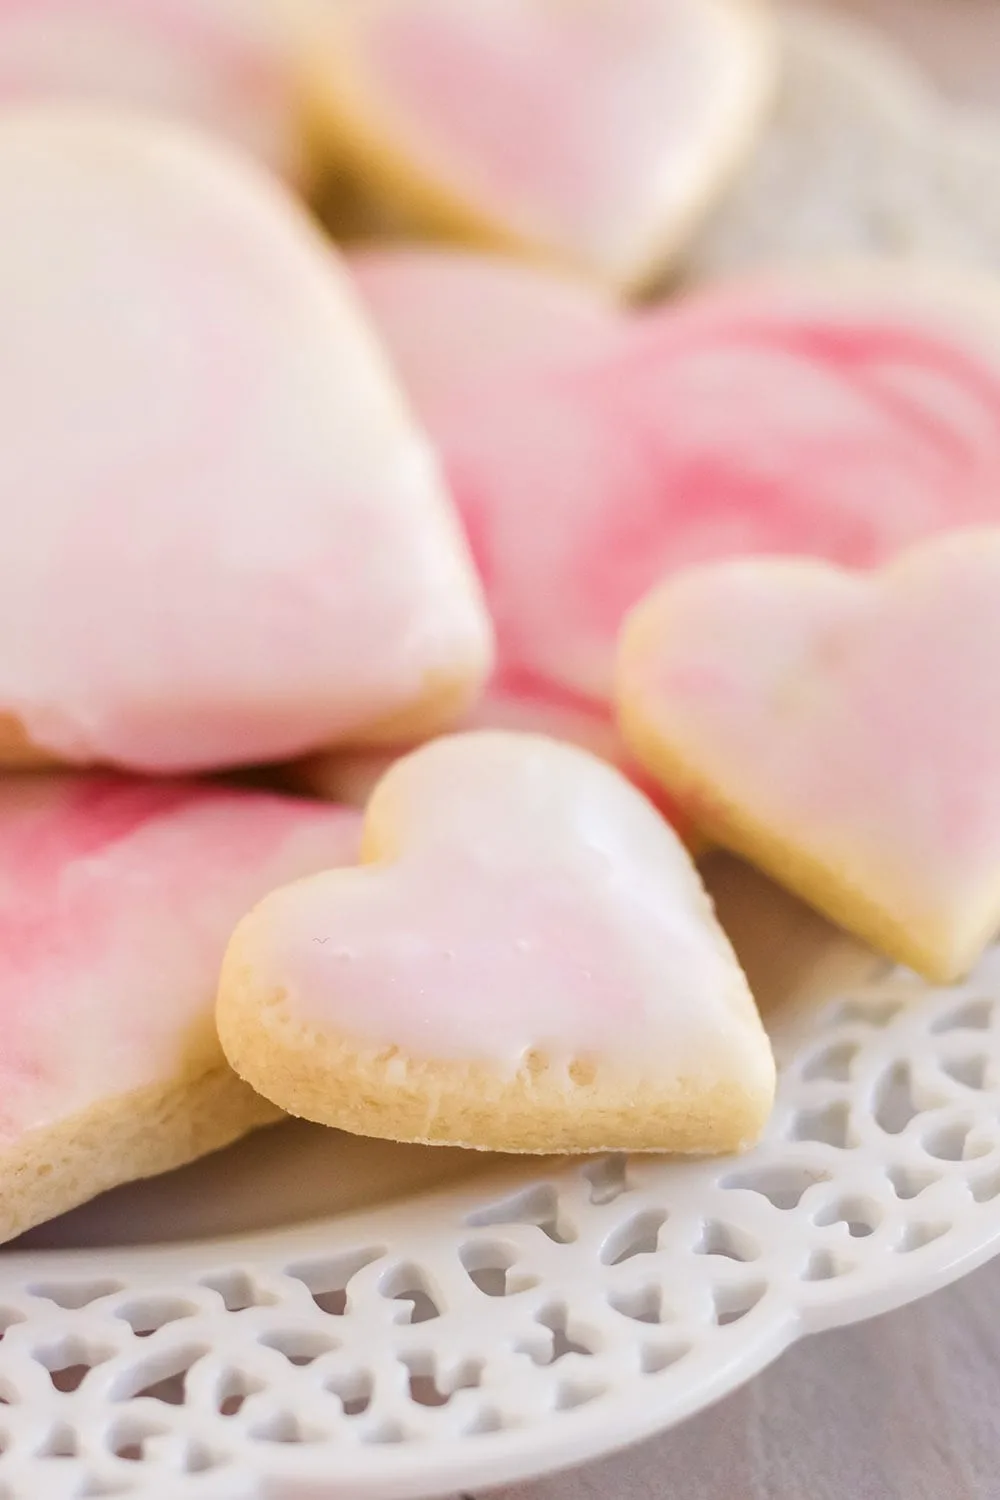 Plate of sugar cookies shaped into hearts with pink and white marble icing.